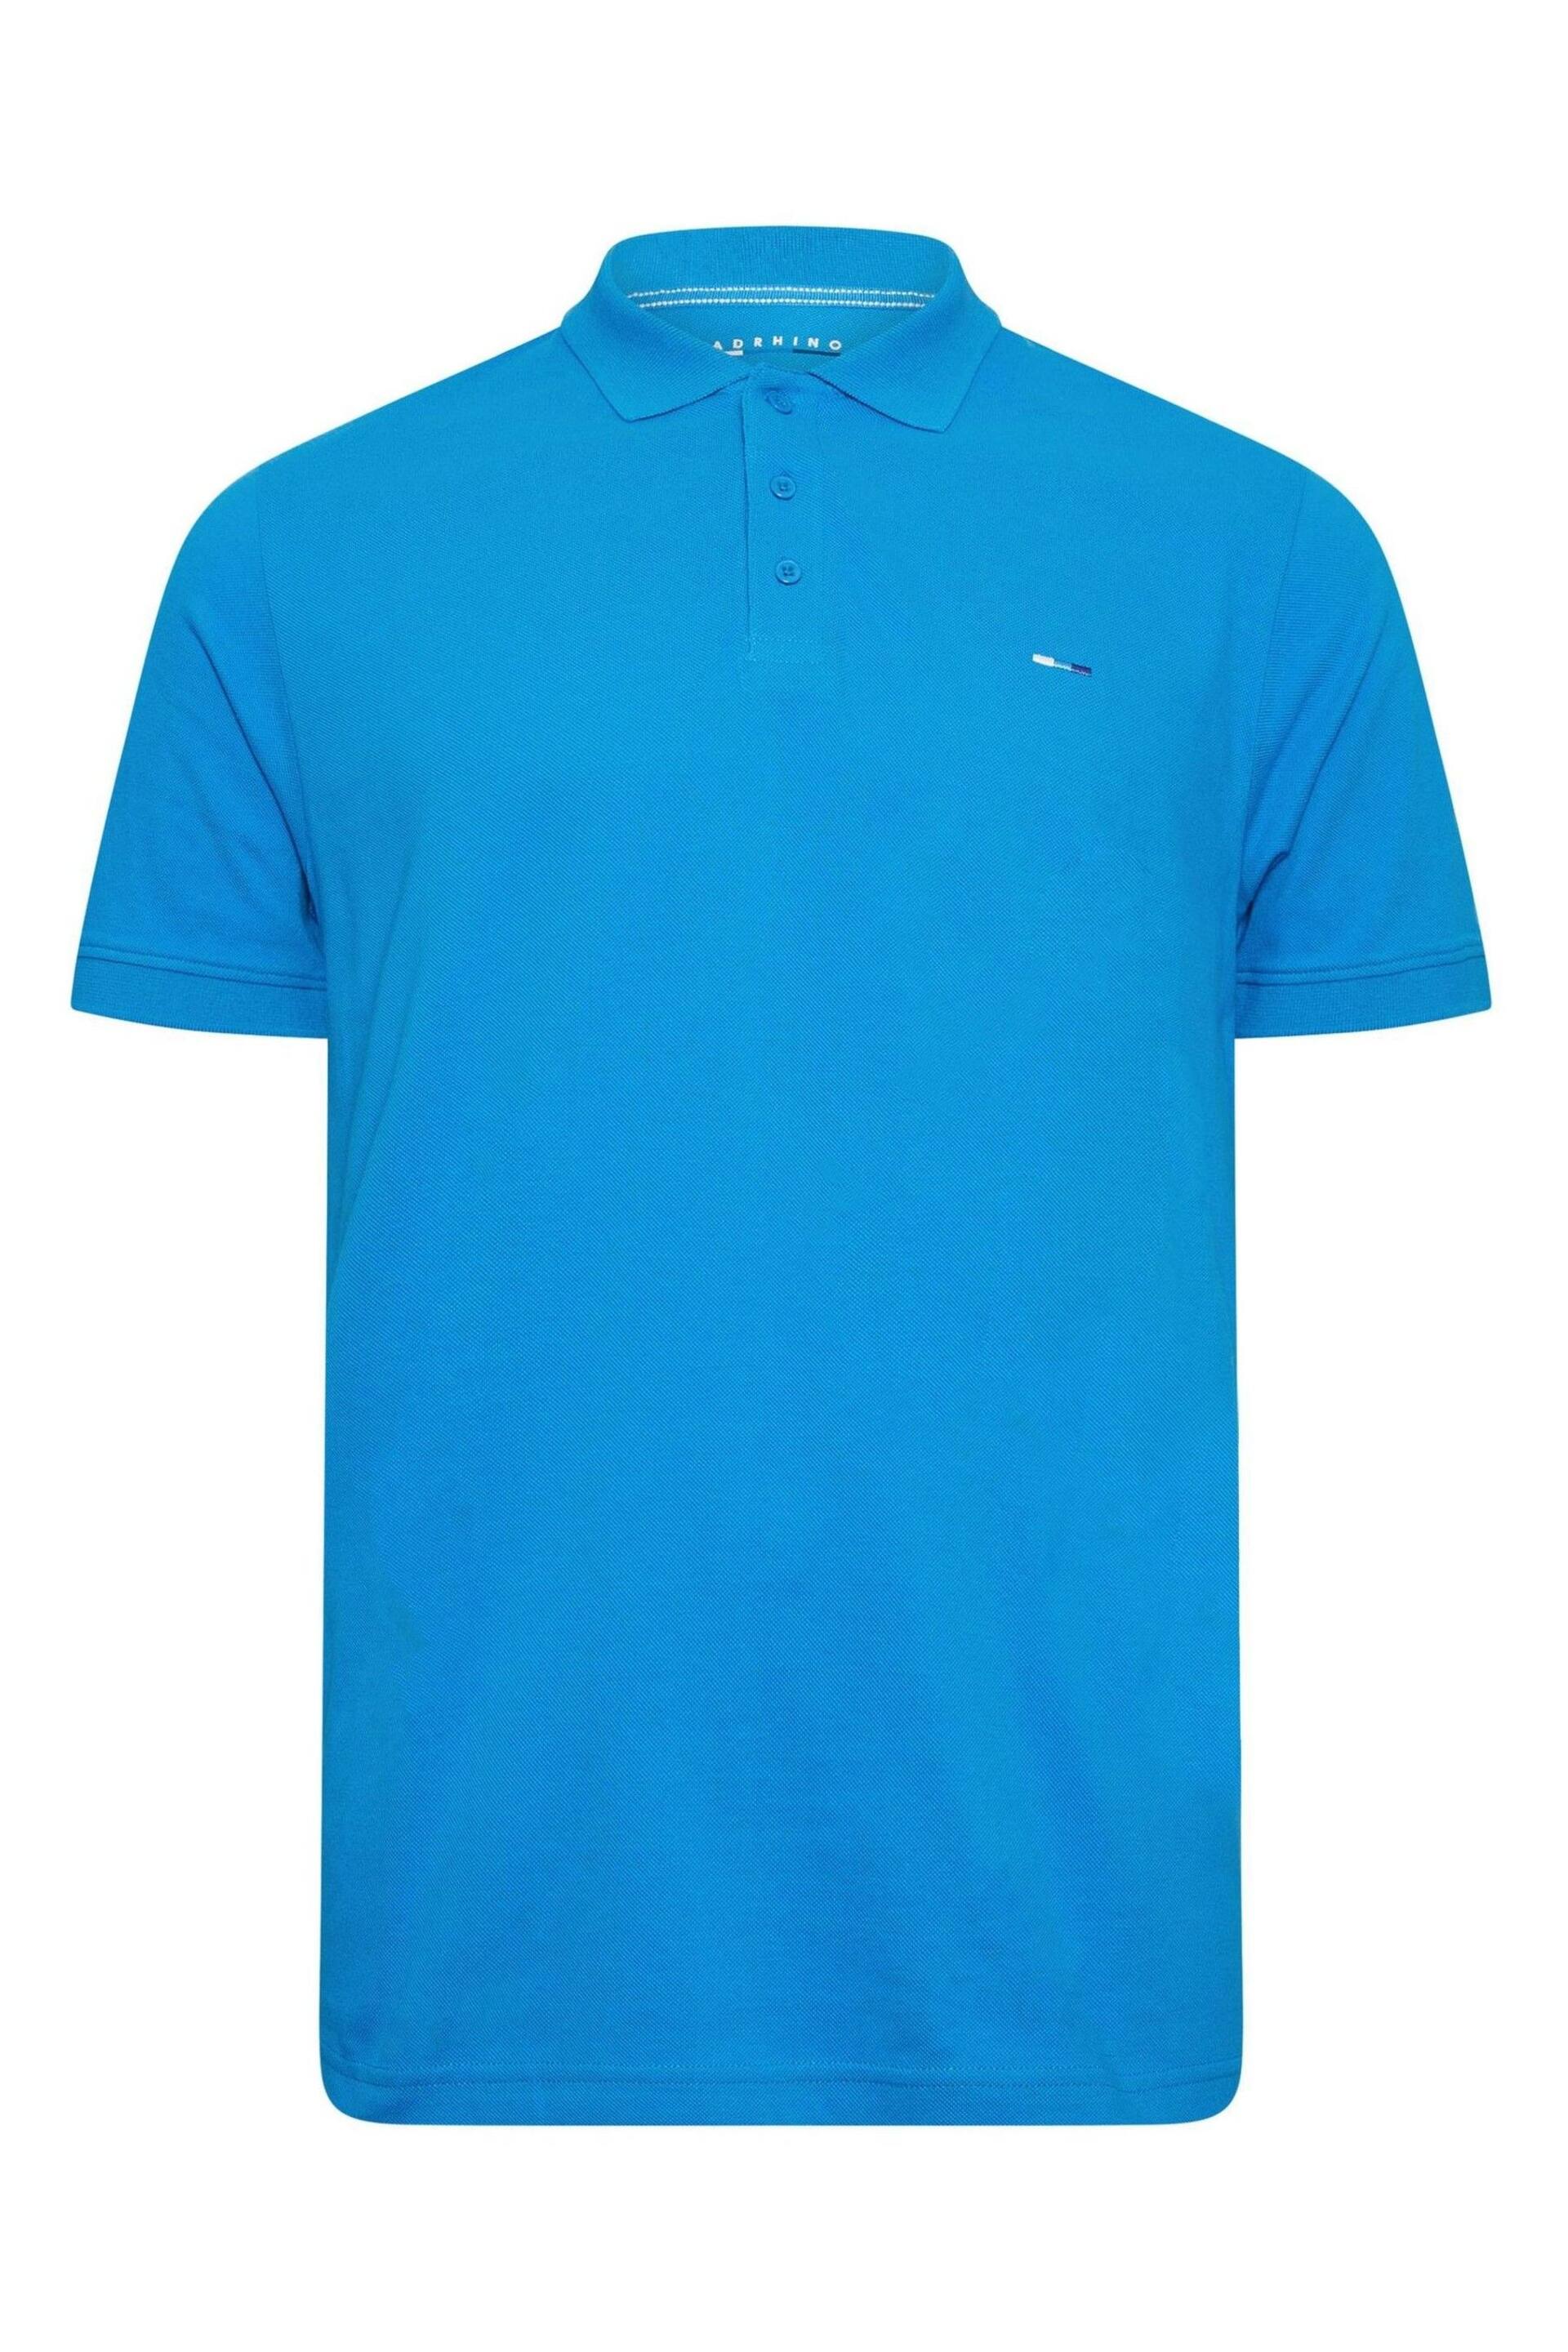 BadRhino Big & Tall Blue/Pink/Teal 3 Pack Polo Shirts - Image 6 of 6